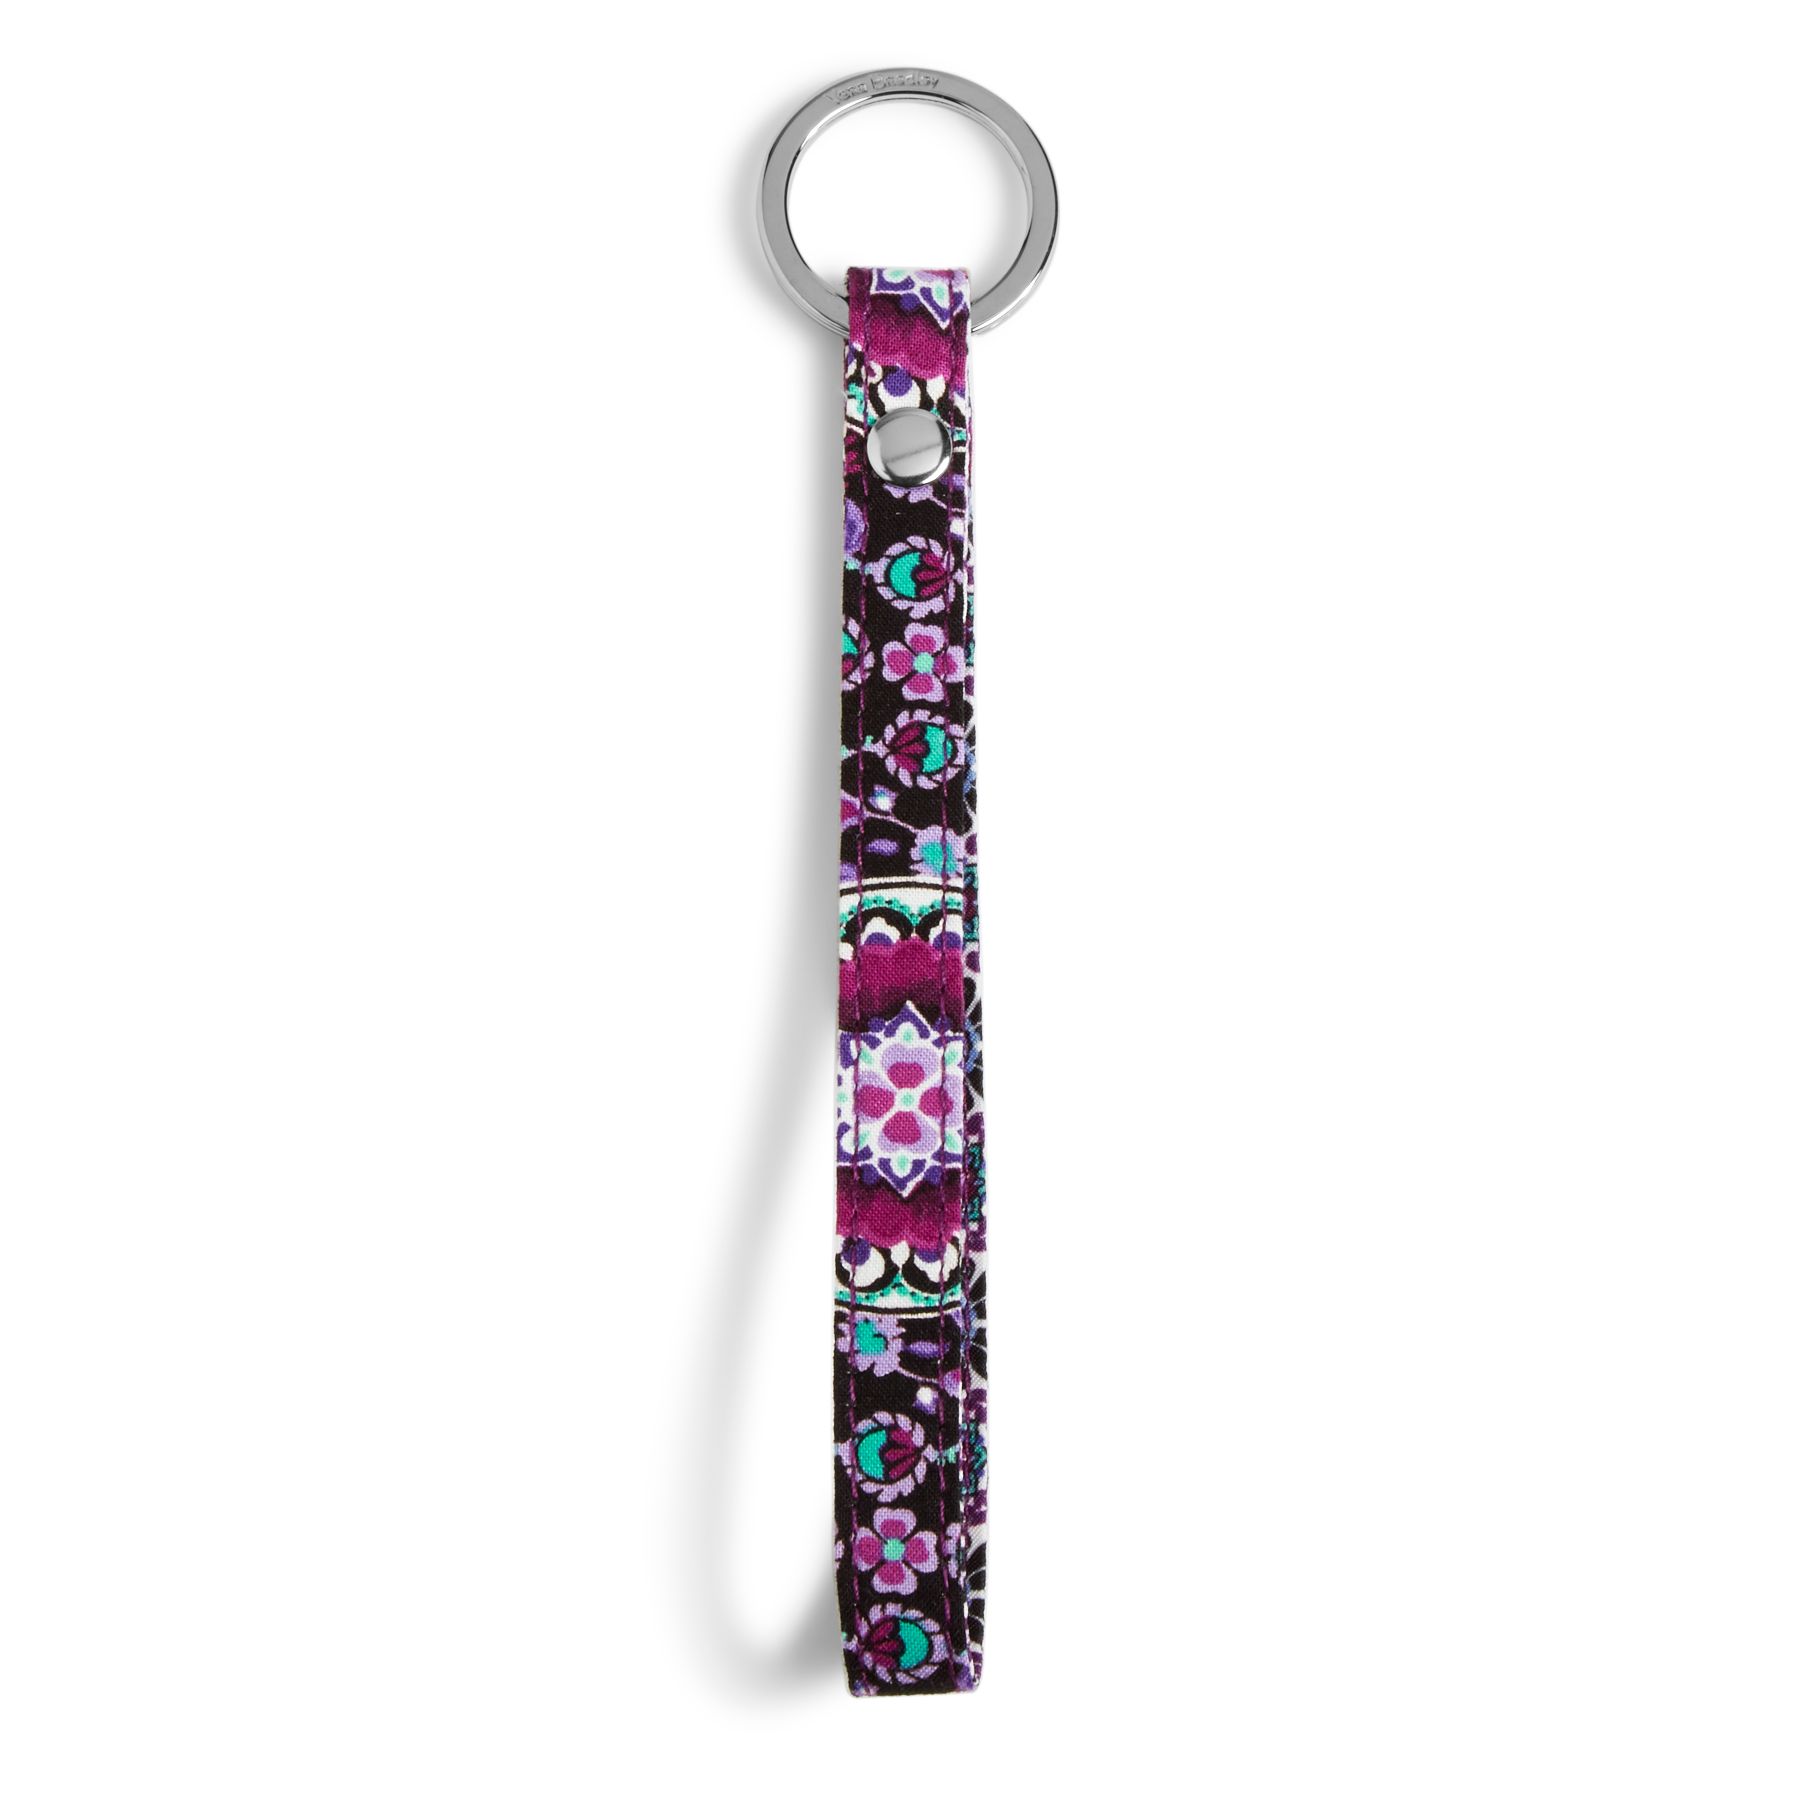 Vera Bradley Iconic In the Loop Keychain in Lilac MedallionIds/Keychains